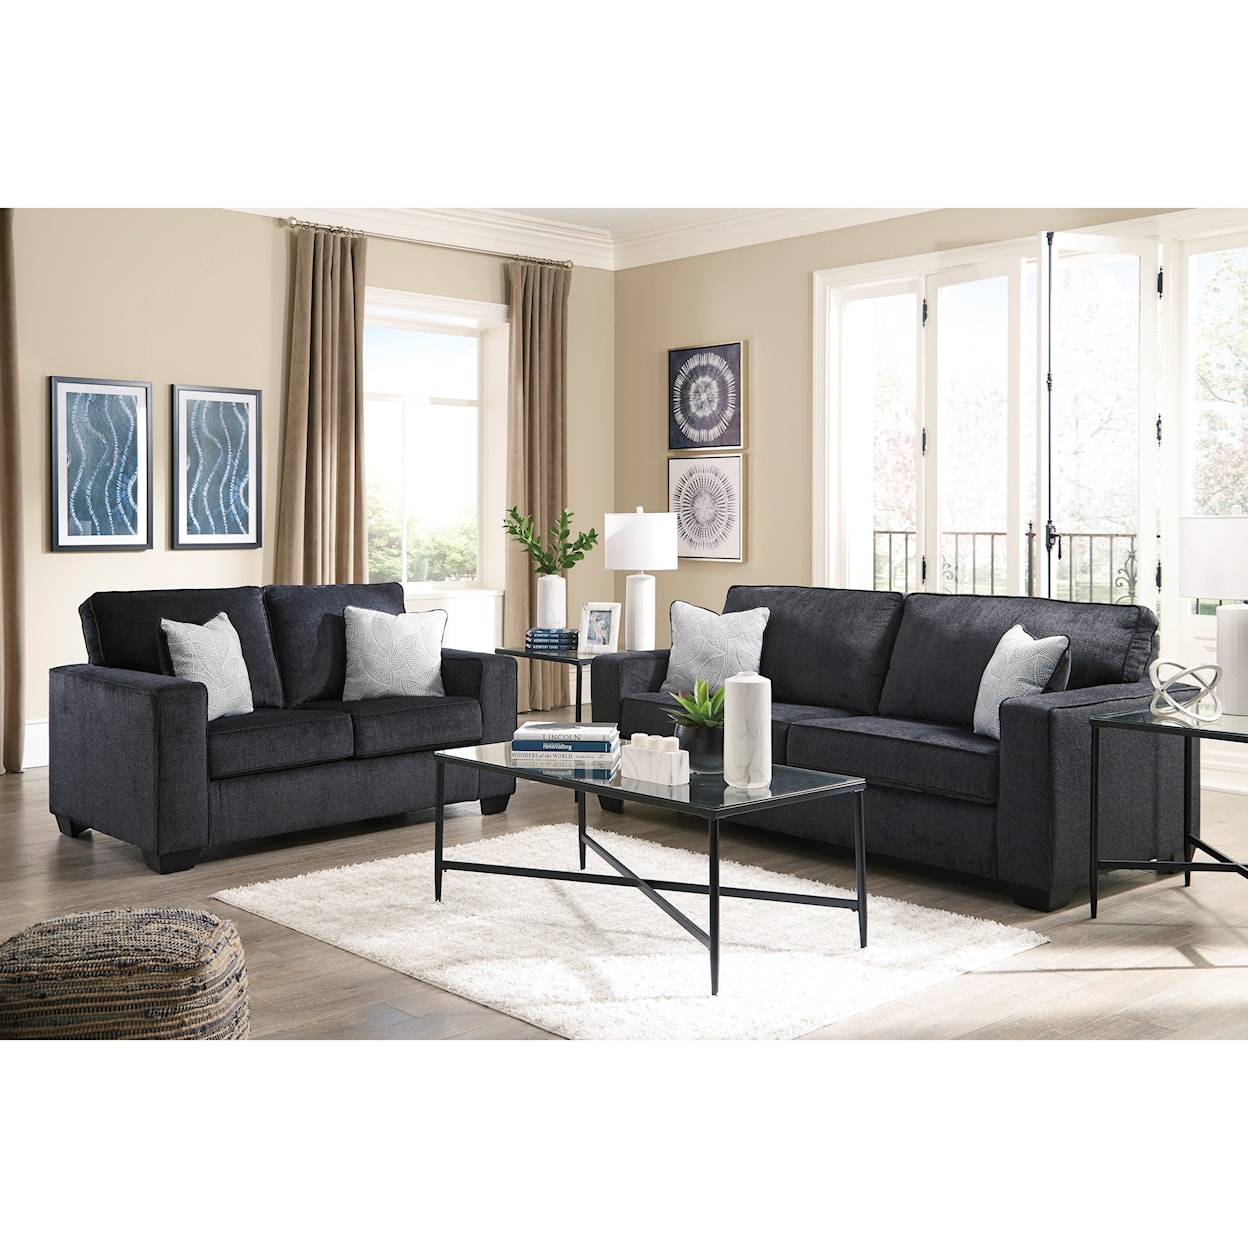 Signature Design by Ashley Altari 2-Piece Living Room Group